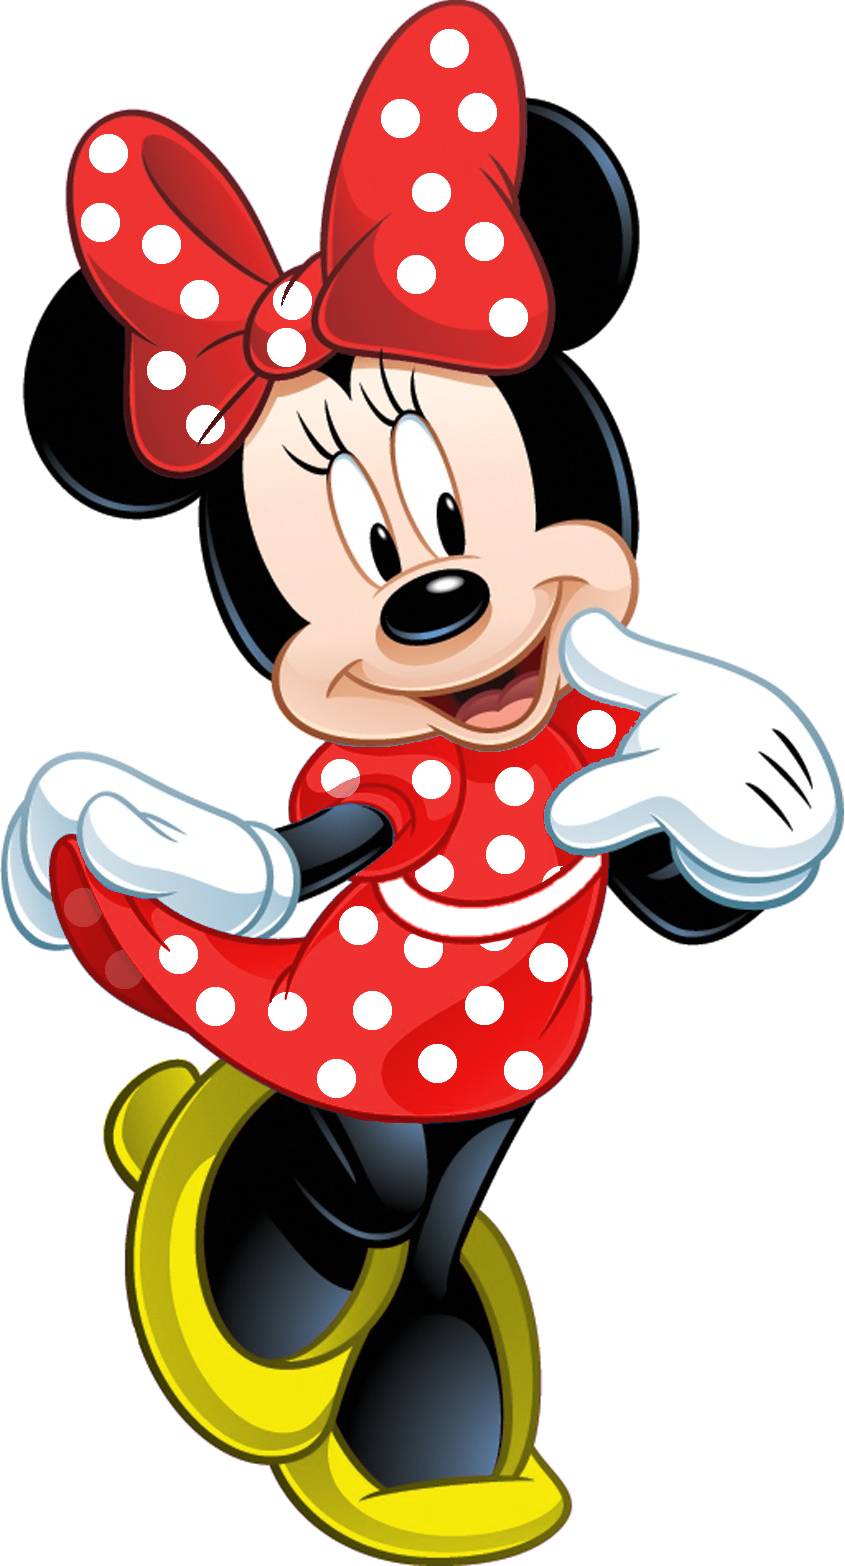 https://static.wikia.nocookie.net/jack-millers-webpage-of-disney/images/9/92/Minnie_Mouse.jpg/revision/latest?cb=20151127002909